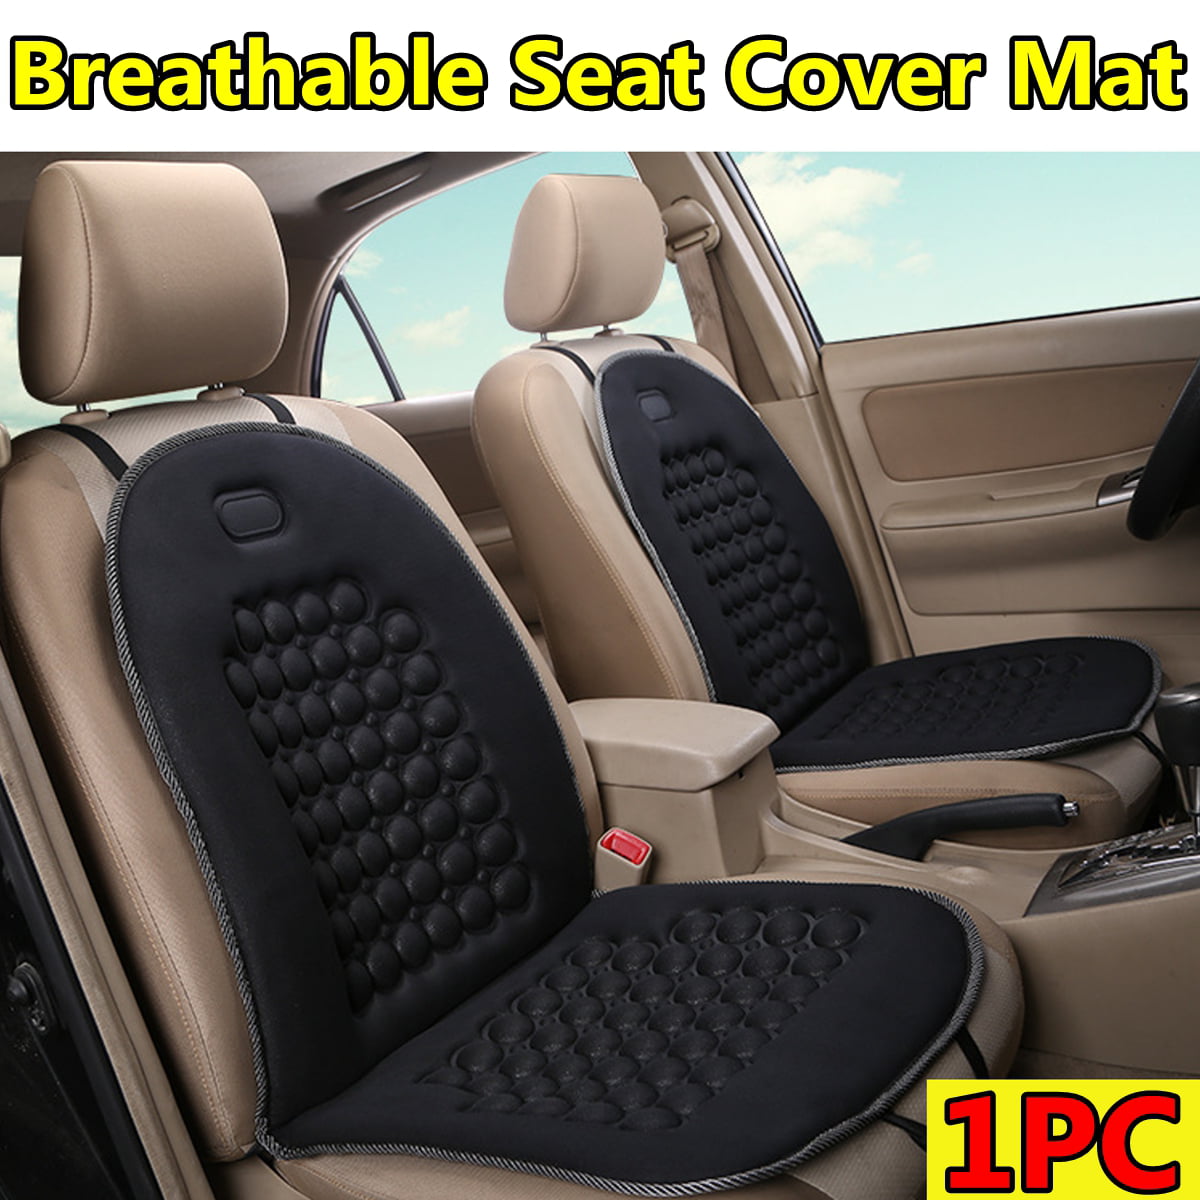 Black Tsumbay Ice Silk Car Seat Cushion Car Mesh Breathable Cool Seat Cushion for Summer,Pain Relief Memory Foam Seat Cover Pad with Non Slip Bottom,for Car,Office Chair,Wheelchair and More 